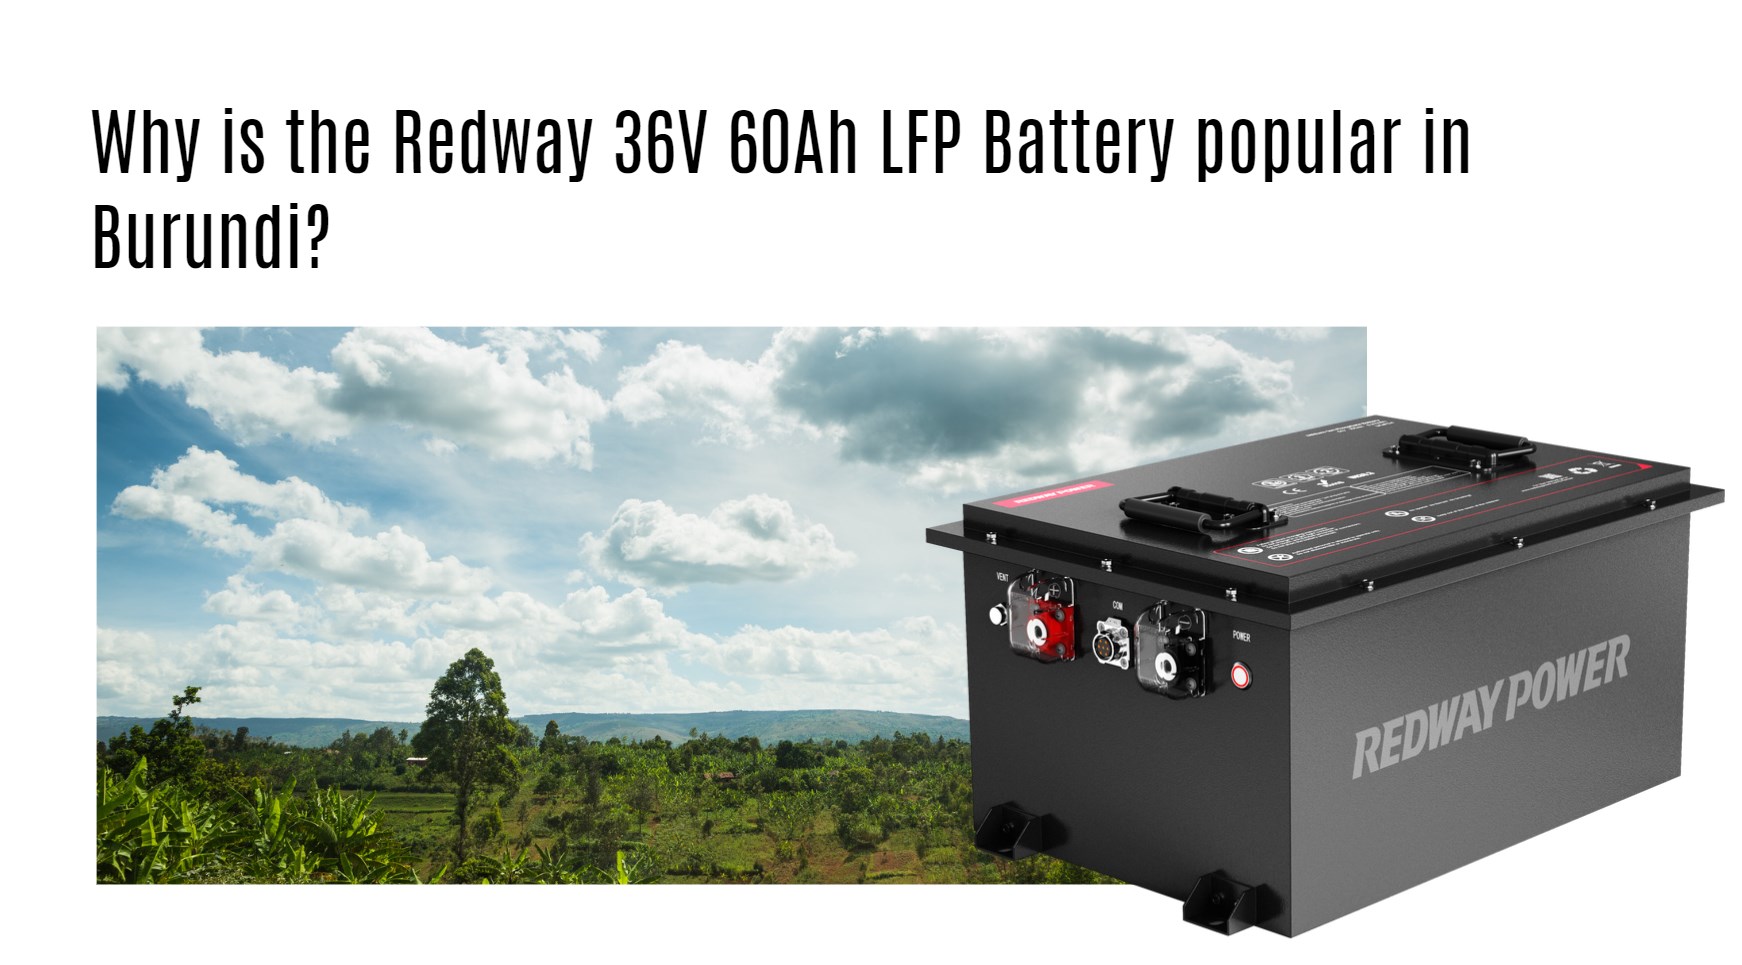 Why is the Redway 36V 60Ah LFP Battery popular in Burundi?